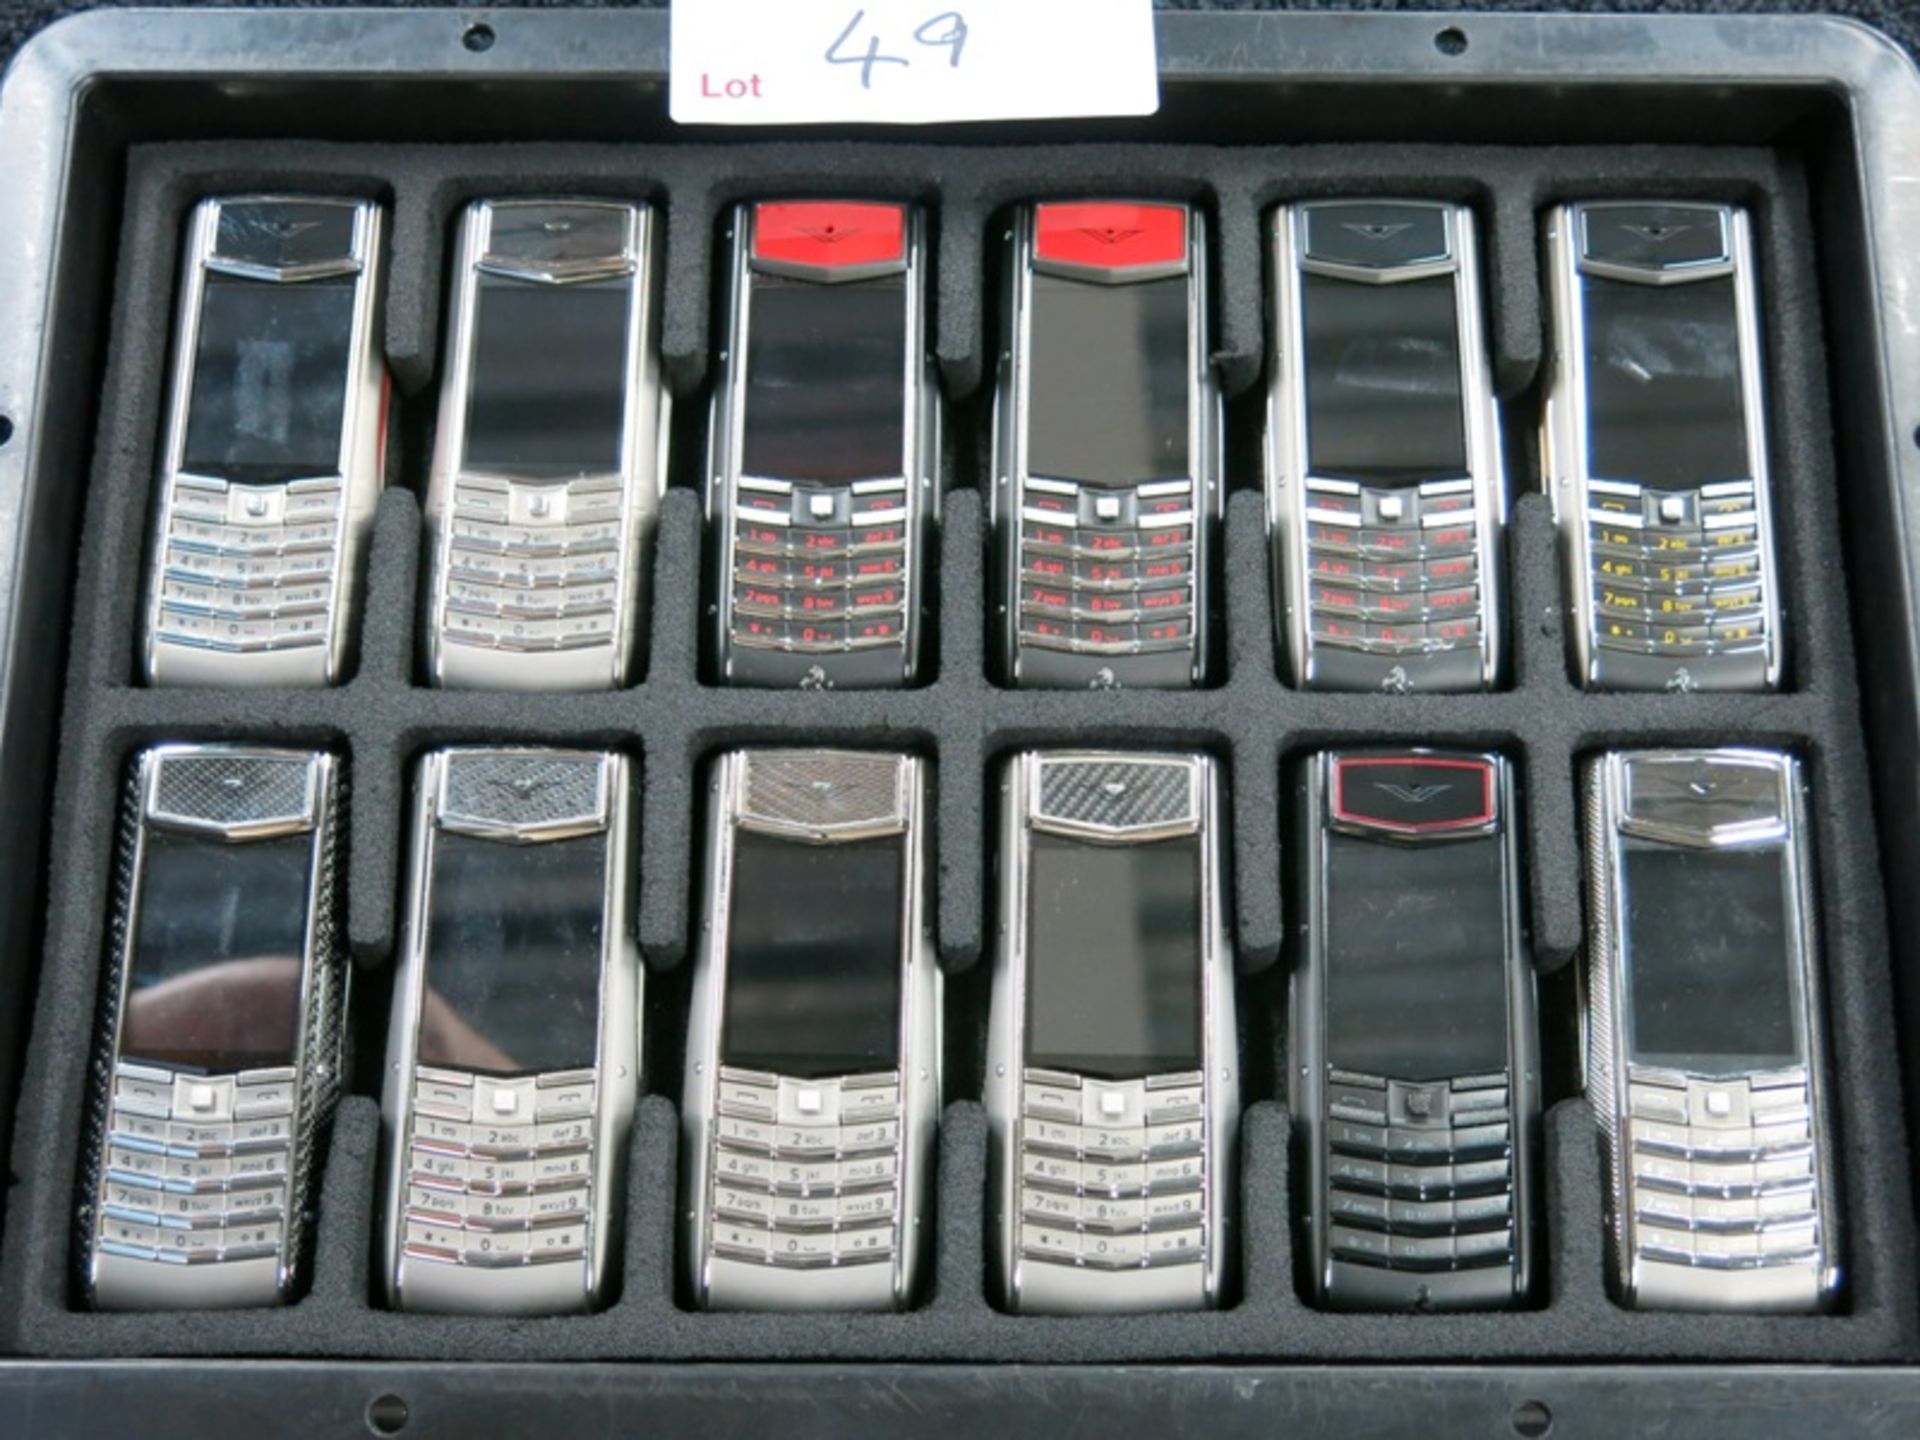 Archive Collection of 46 Vertu Ascent Ti Phones made of Titanium, Stainless Steel, Ceramic Pillow,